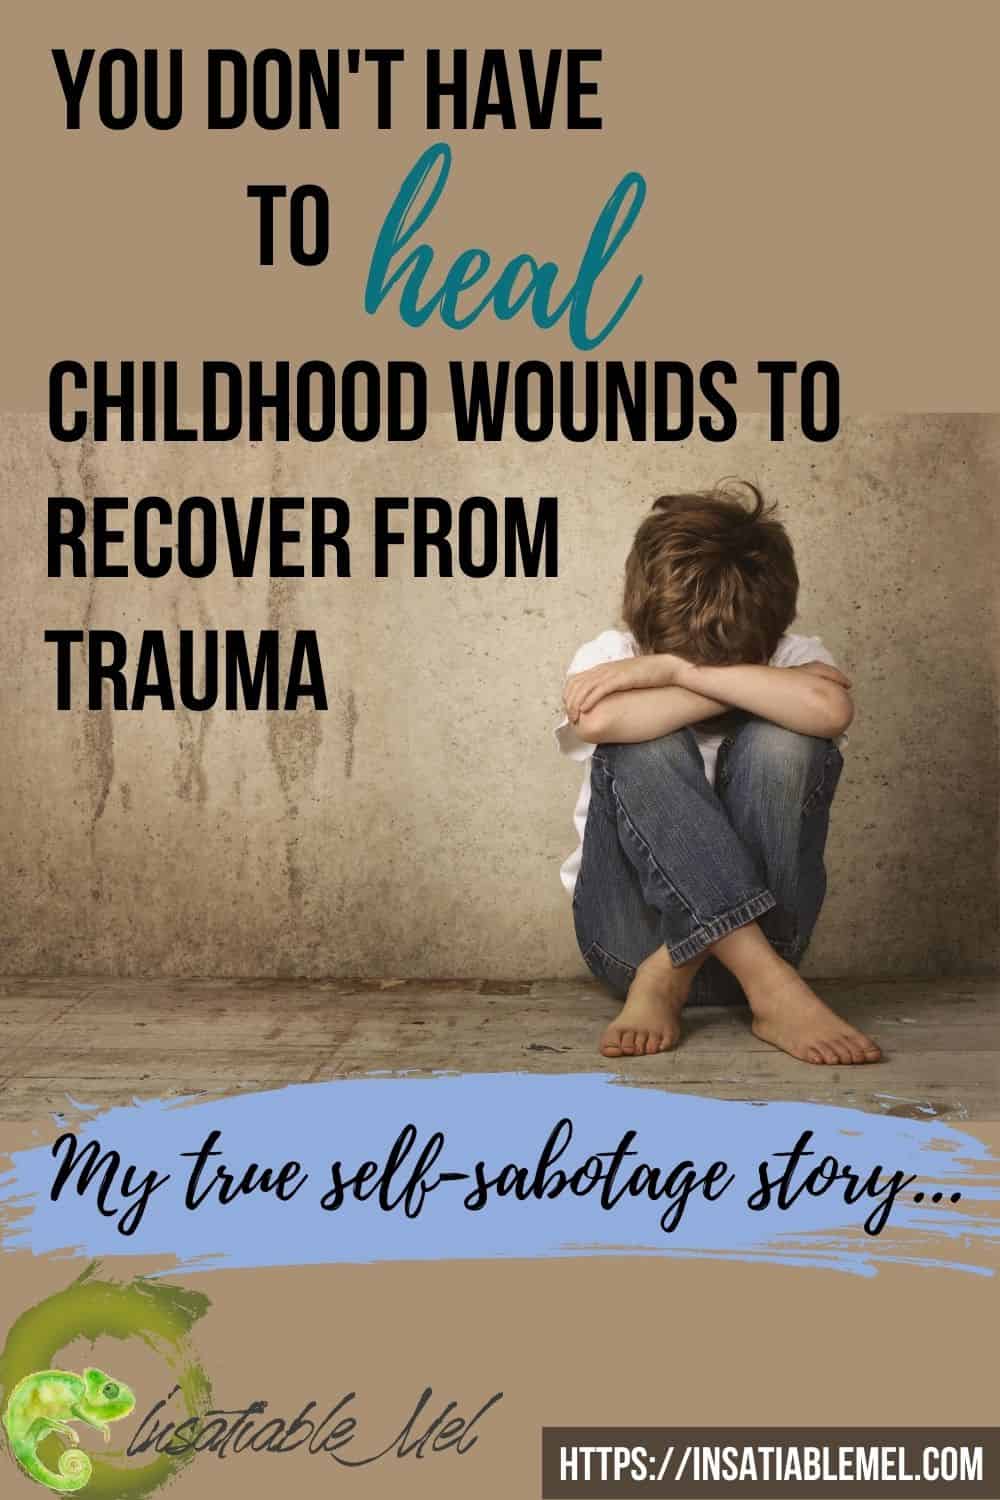 You dont have to heal more childhood wounds #insatiablemel #trauma #rapidtransformationaltherapy #hypnotherapy